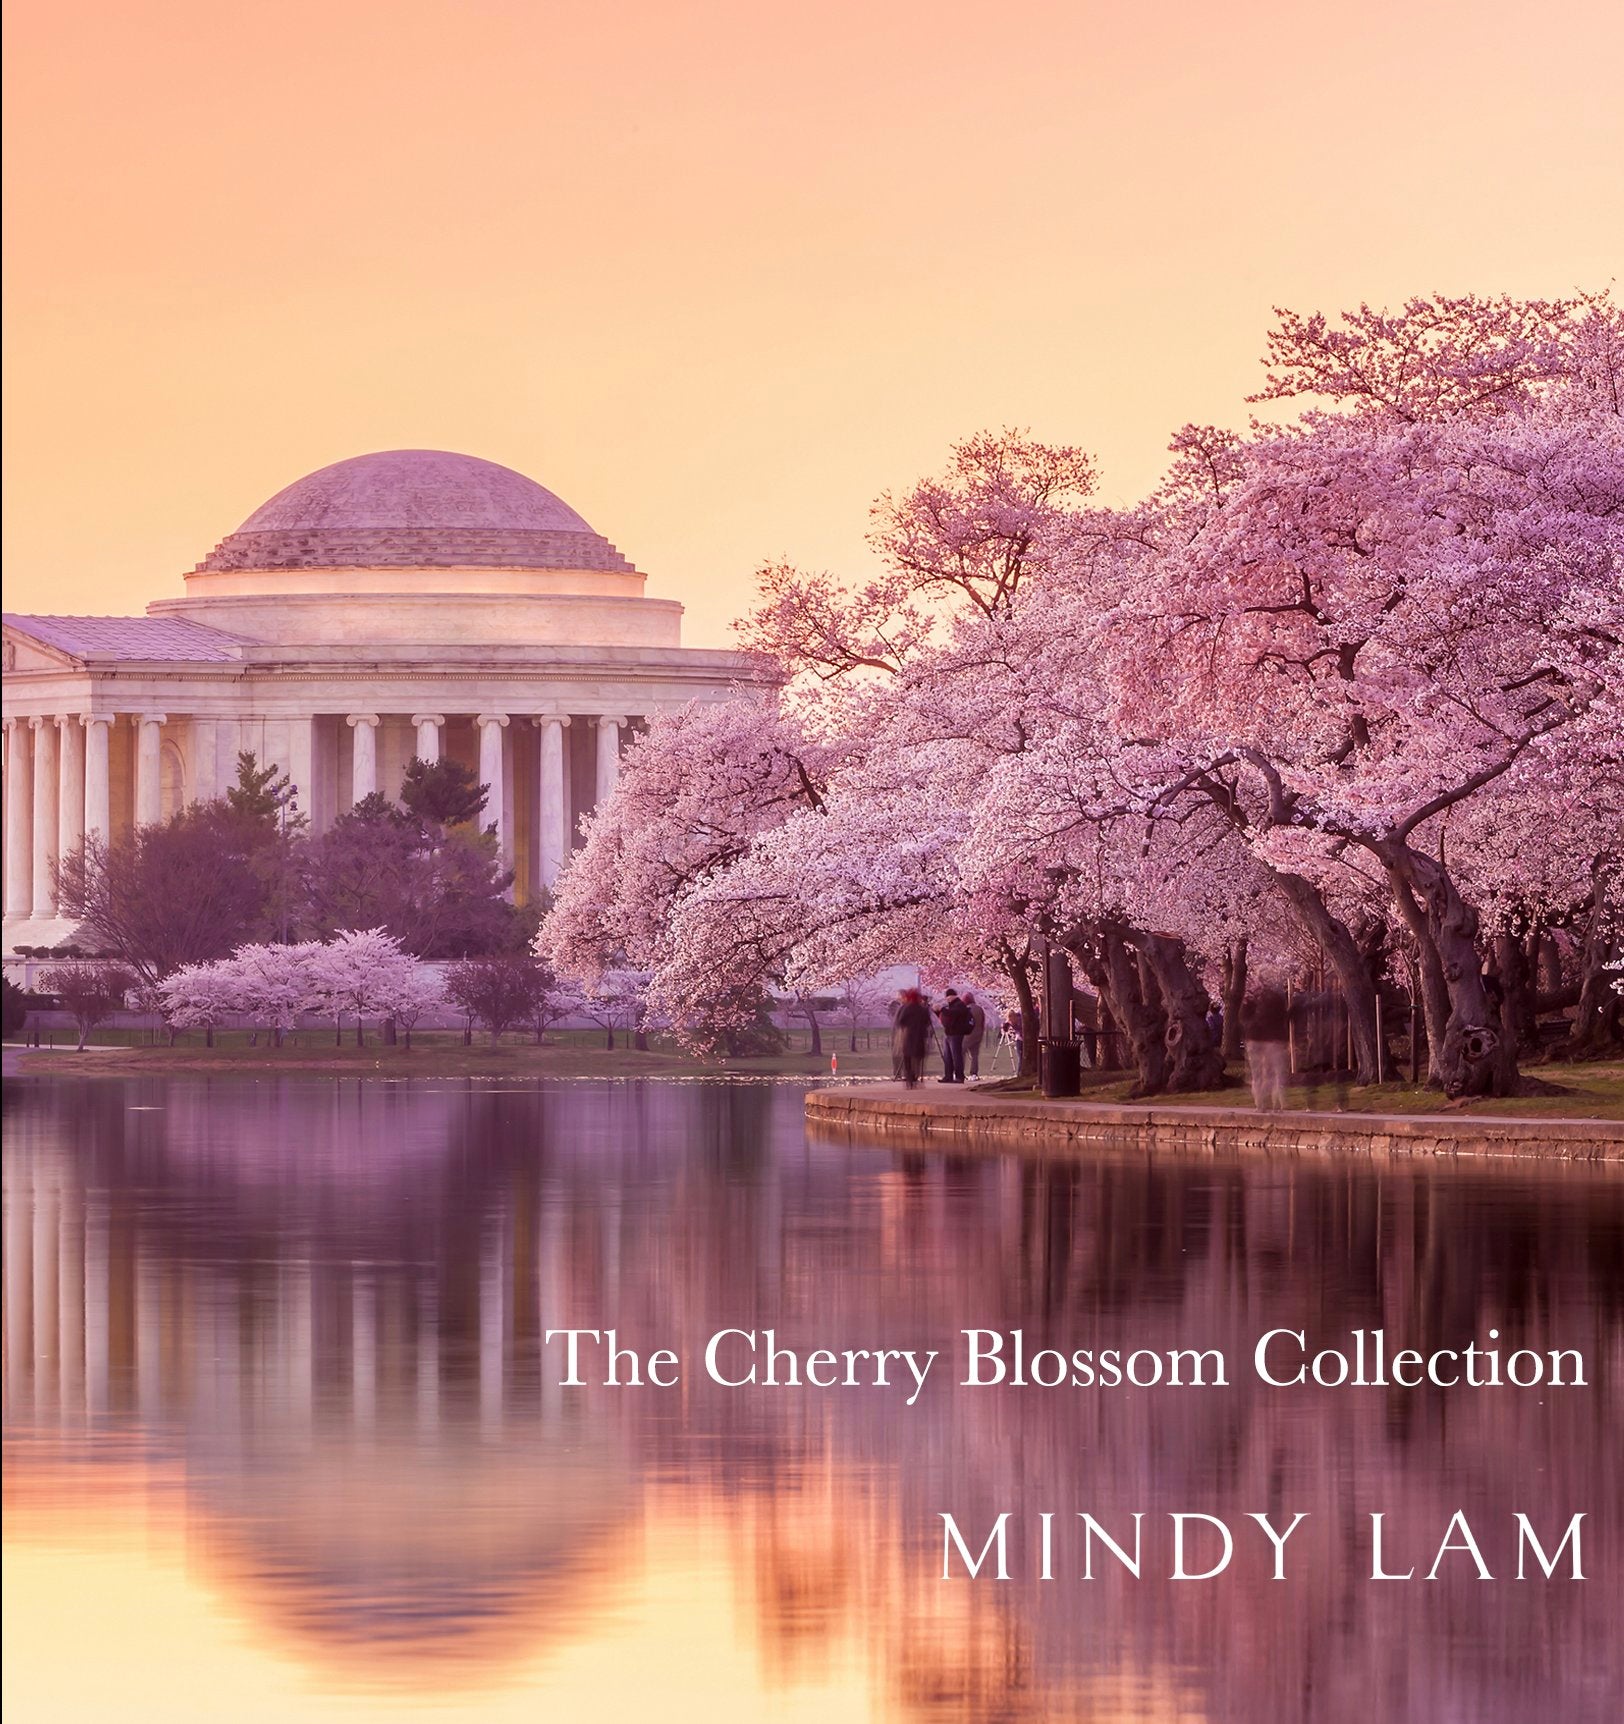 The Cherry Blossom Collection